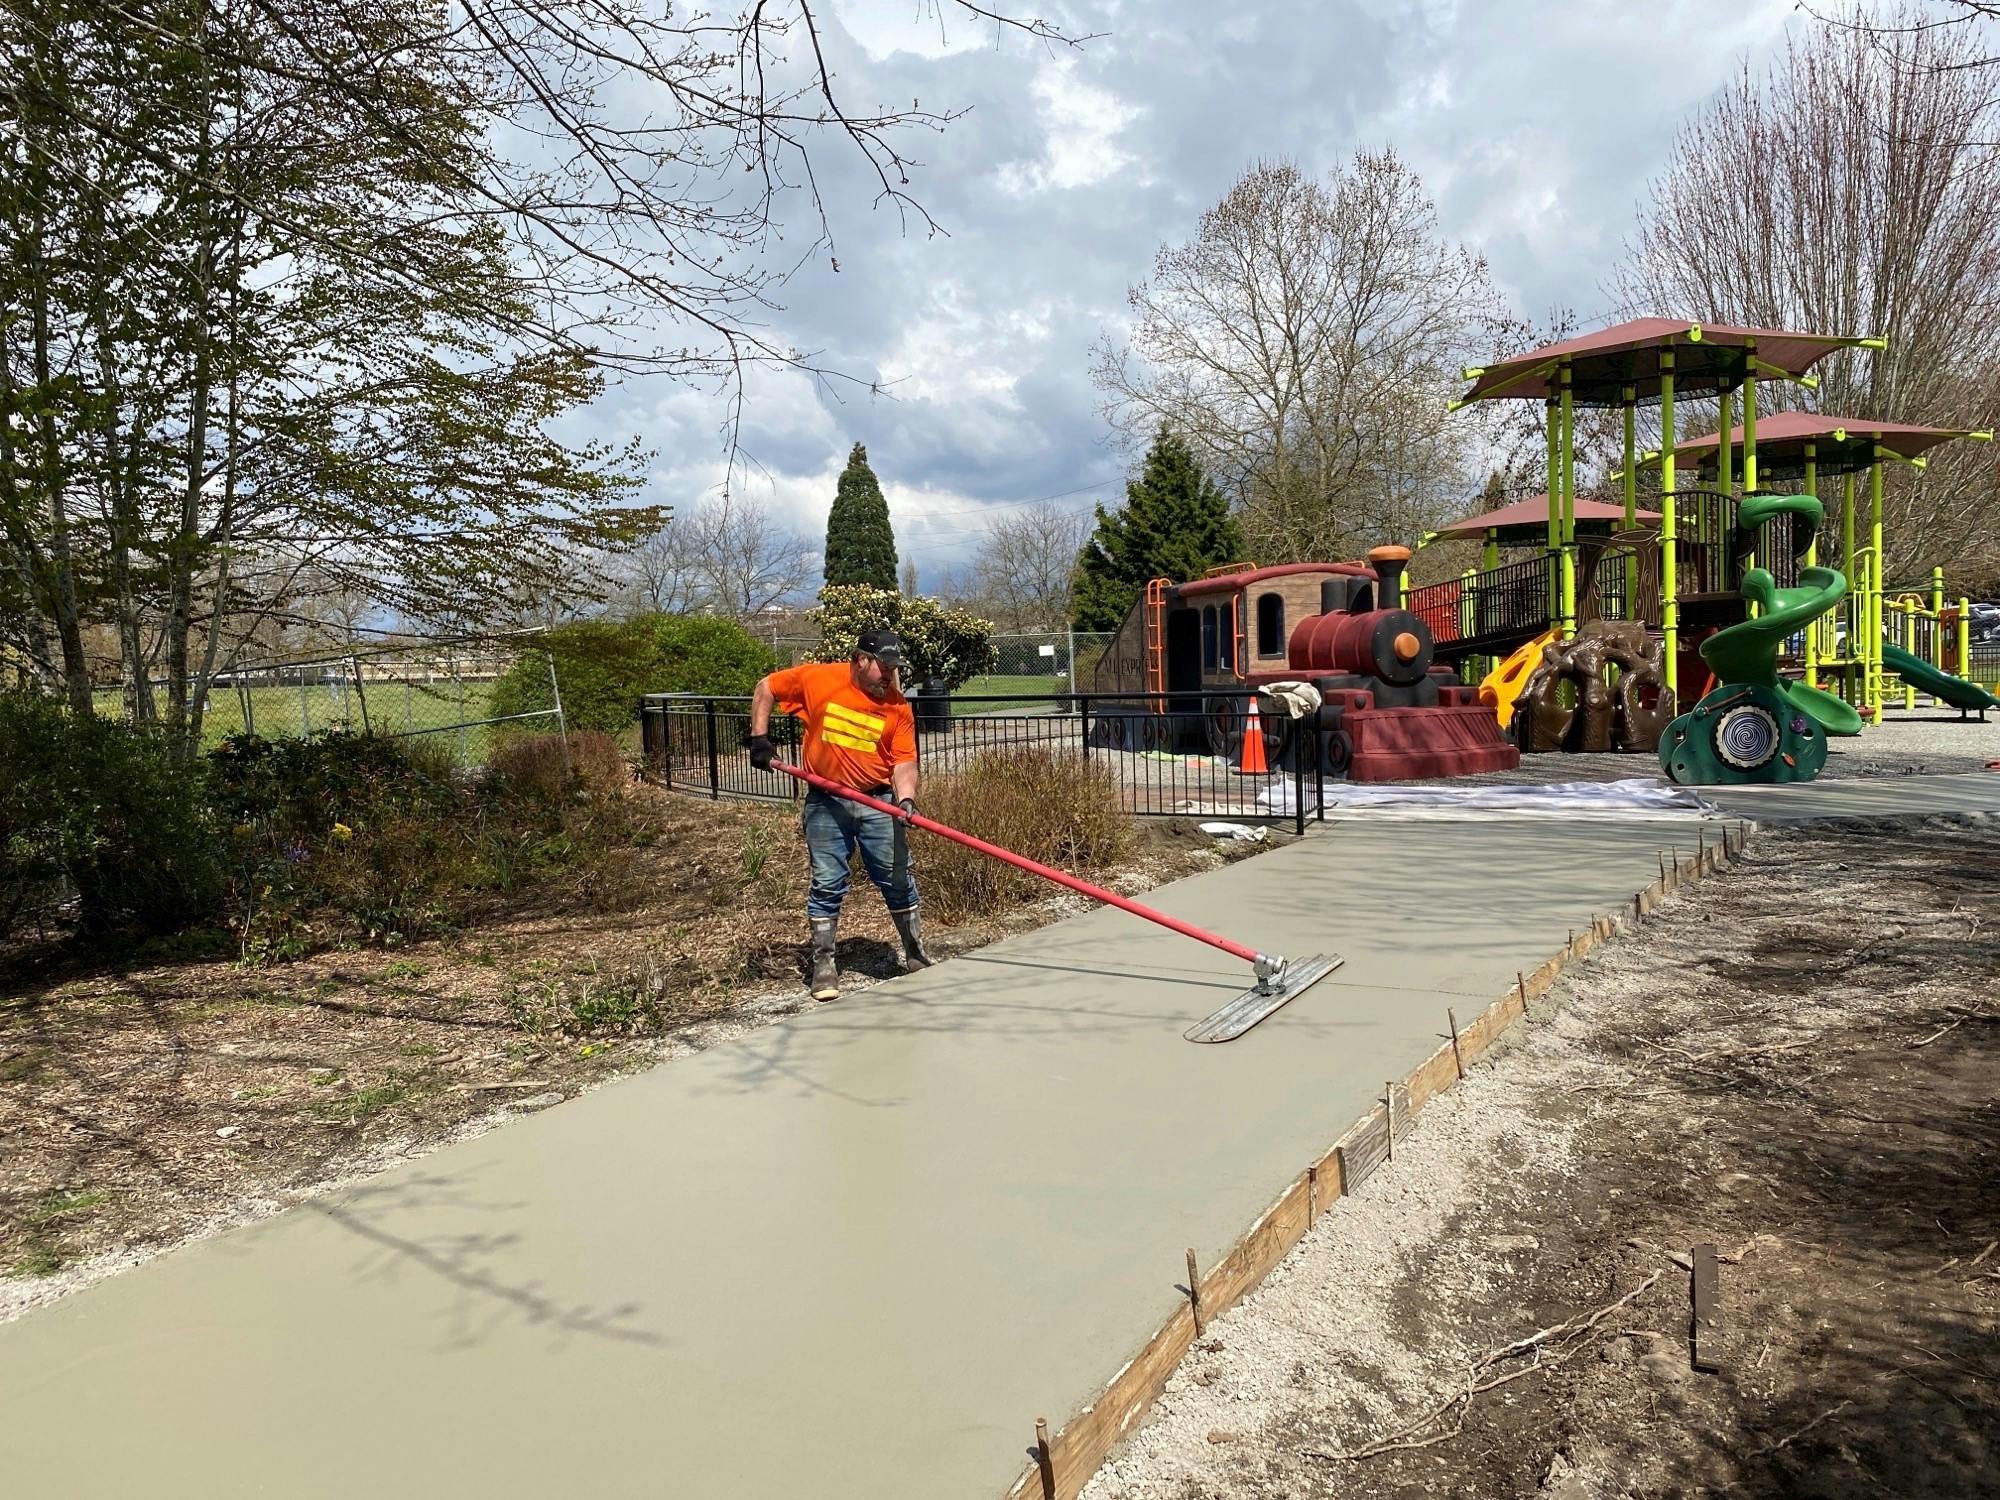 Concrete pathways poured and setting around the playground.